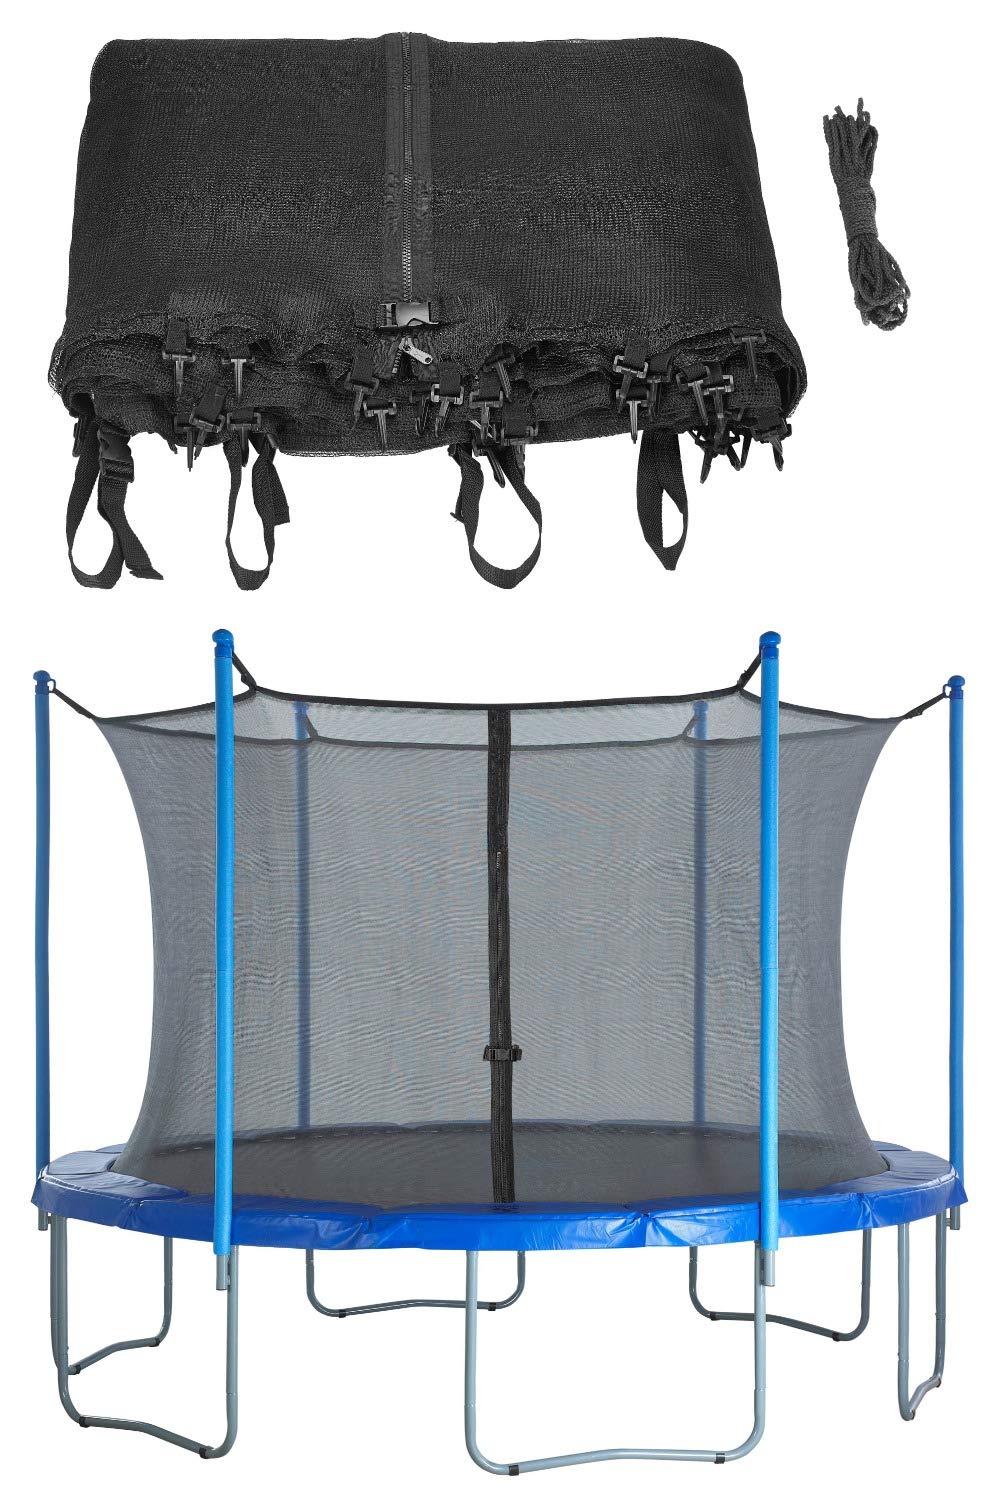 Machrus Upper Bounce Trampoline Net Replacement 7.5FT 8FT 9FT 10FT 12FT 13FT 14FT 15FT 16FT- Safety Net for Straight Poles/Arches Round Trampoline- Inside Enclosure with Straps- UV & Tear-Resistant